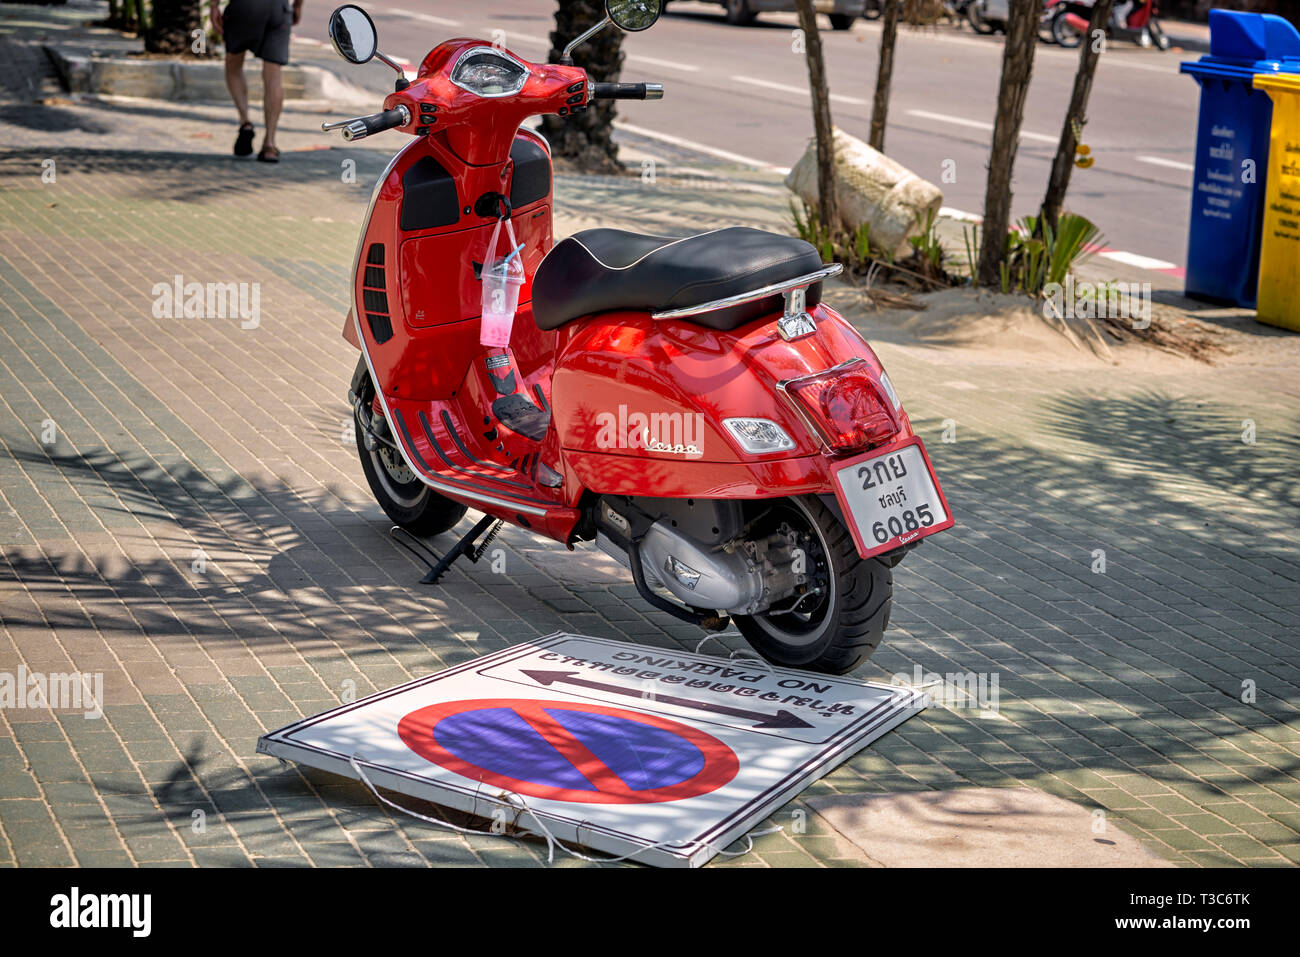 Illegal parking. Motorbike parked on the pavement having also demolished the no parking sign. Thailand, Southeast Asia Stock Photo